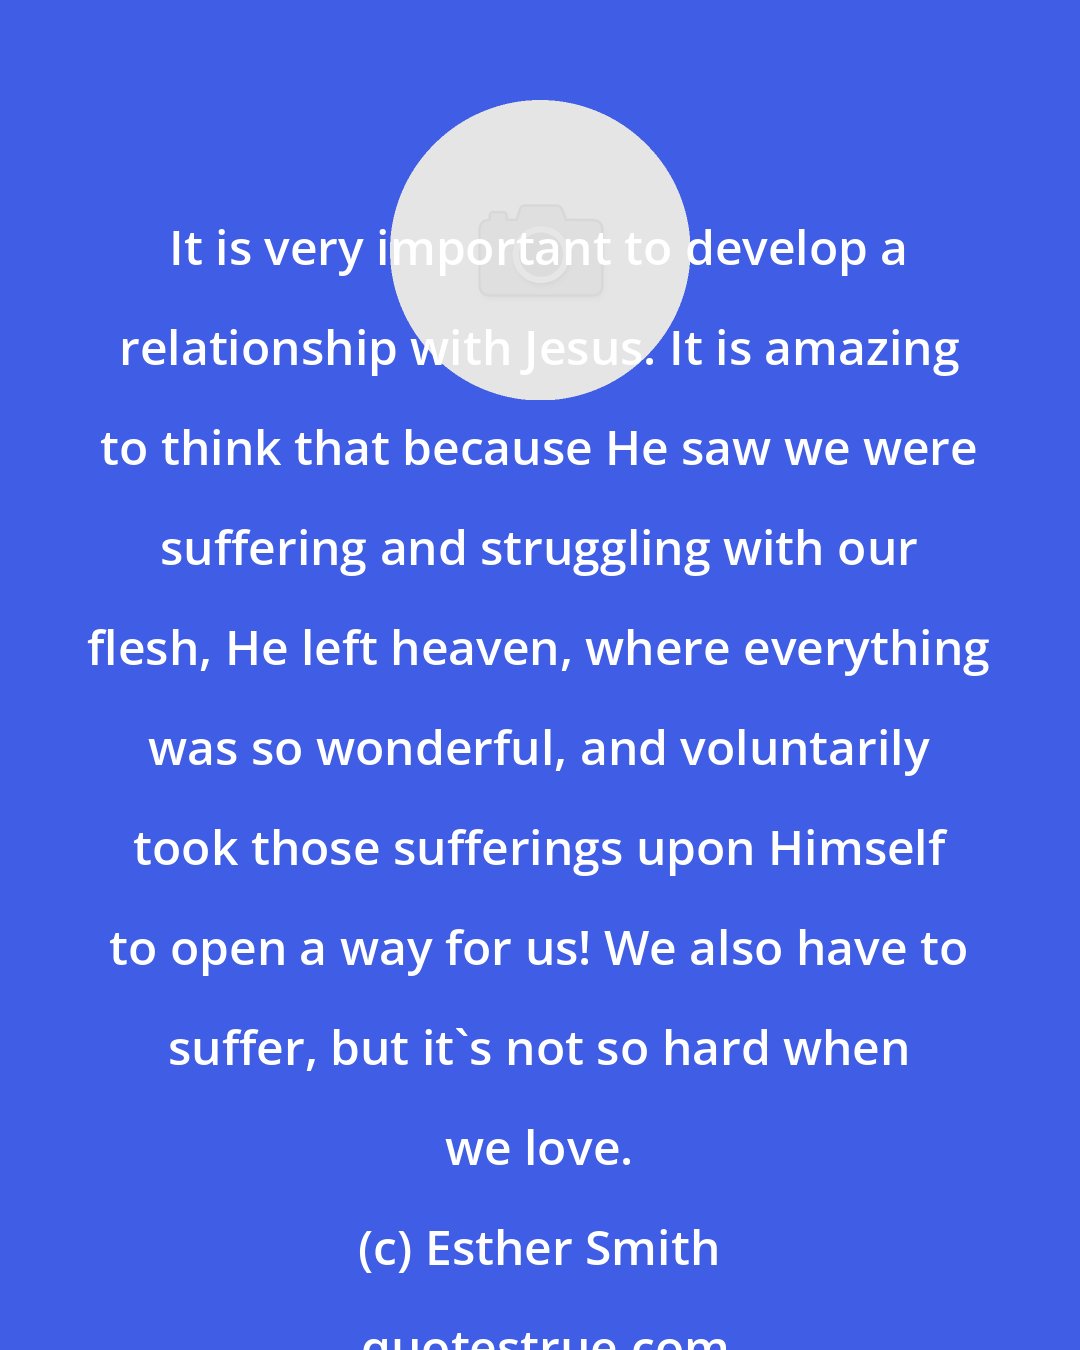 Esther Smith: It is very important to develop a relationship with Jesus. It is amazing to think that because He saw we were suffering and struggling with our flesh, He left heaven, where everything was so wonderful, and voluntarily took those sufferings upon Himself to open a way for us! We also have to suffer, but it's not so hard when we love.